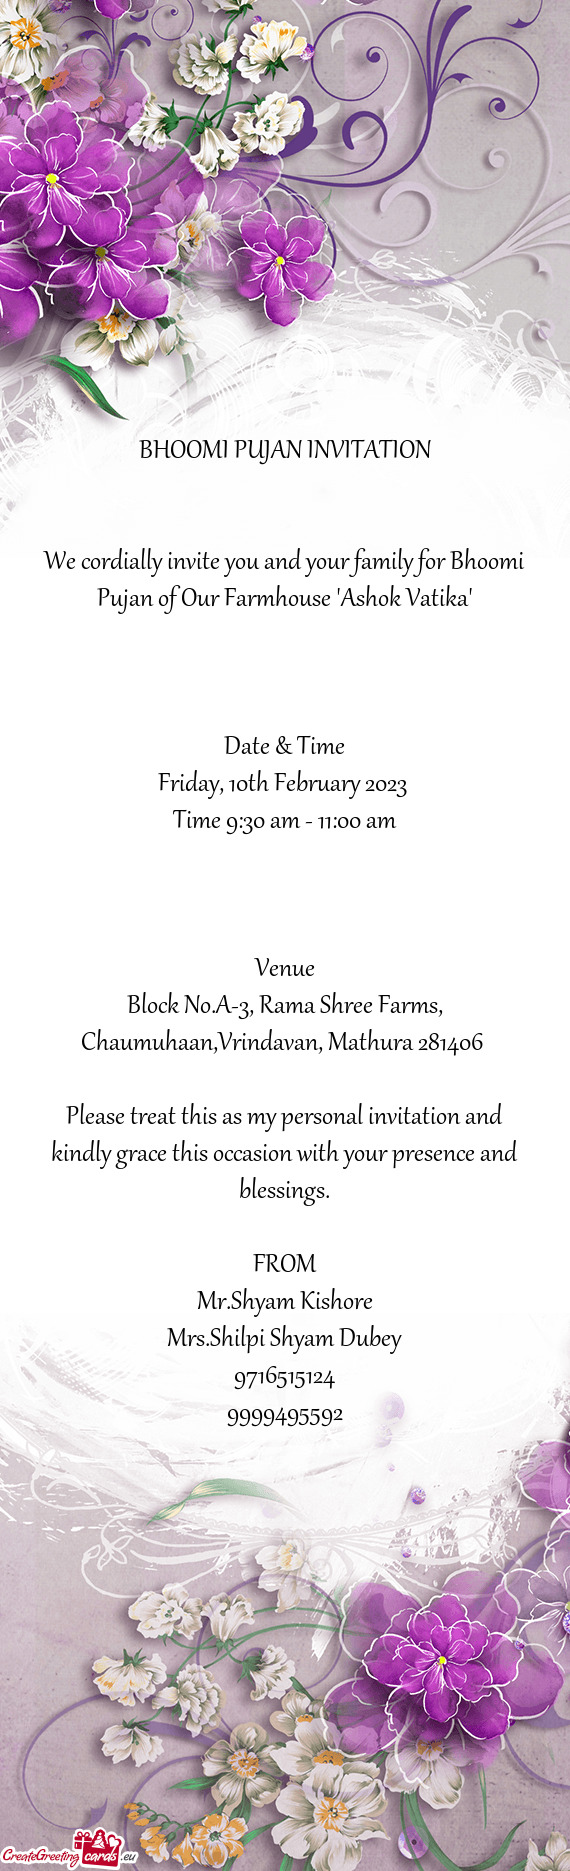 We cordially invite you and your family for Bhoomi Pujan of Our Farmhouse "Ashok Vatika"